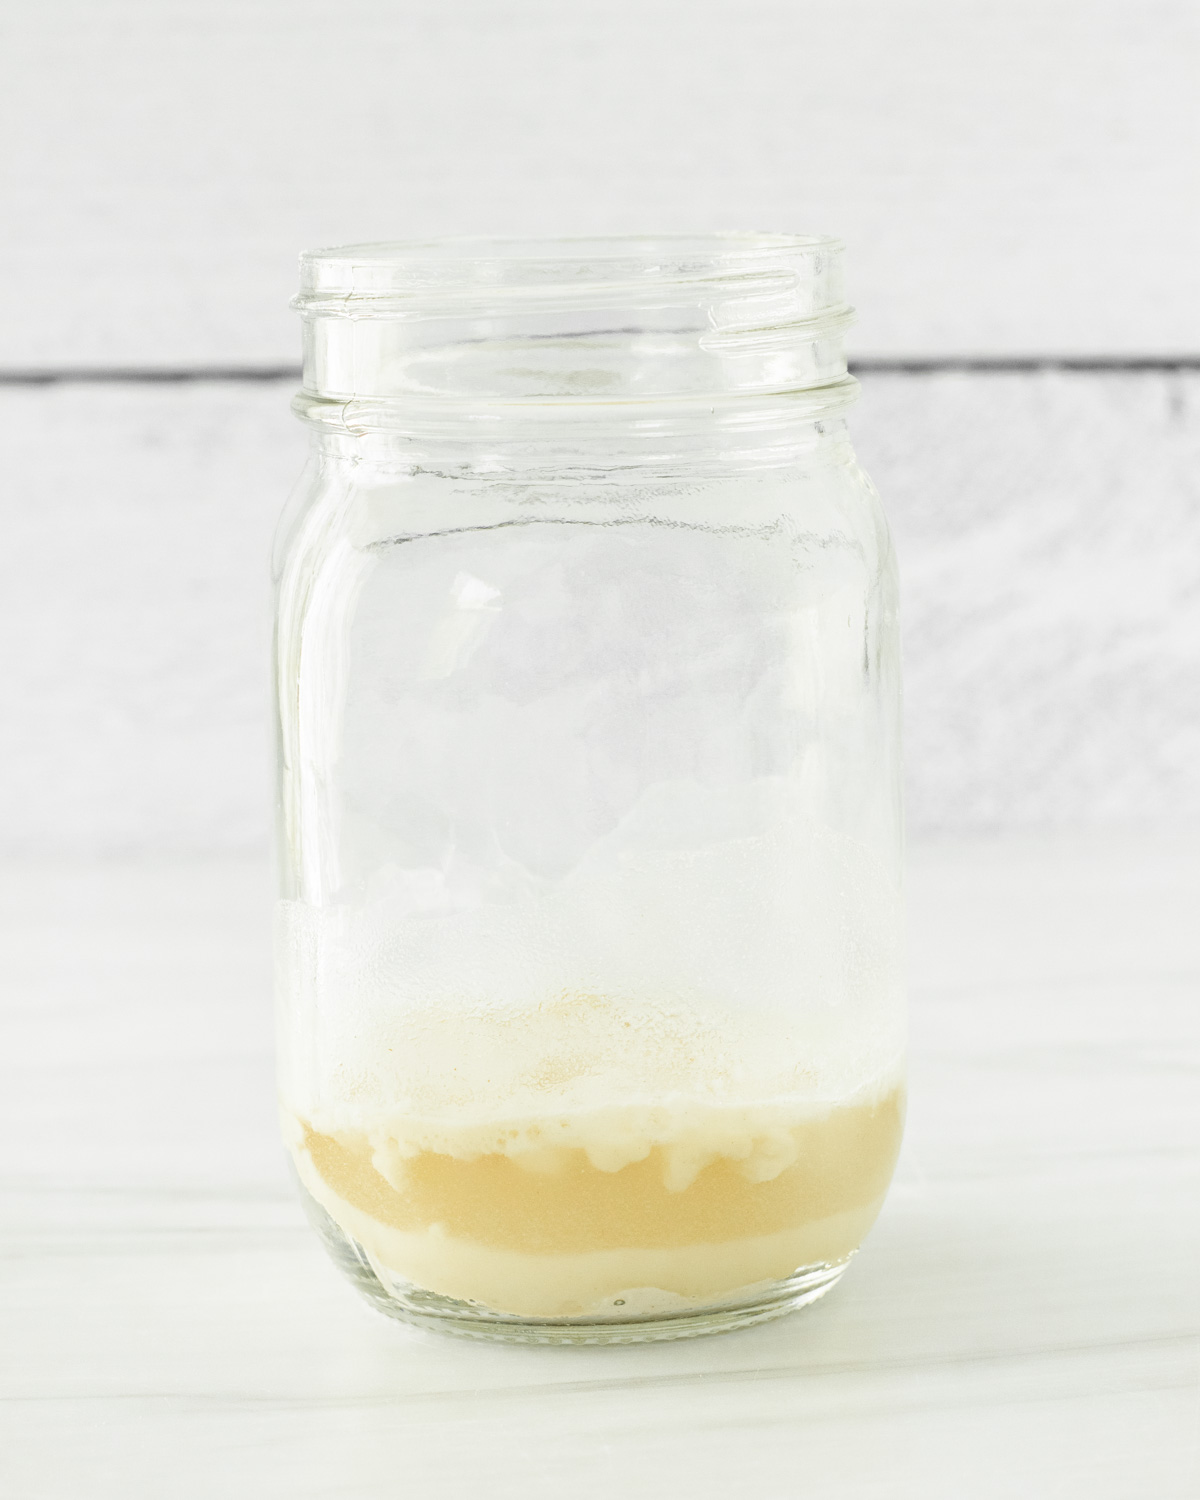 On day 1, add flour and water to a glass jar